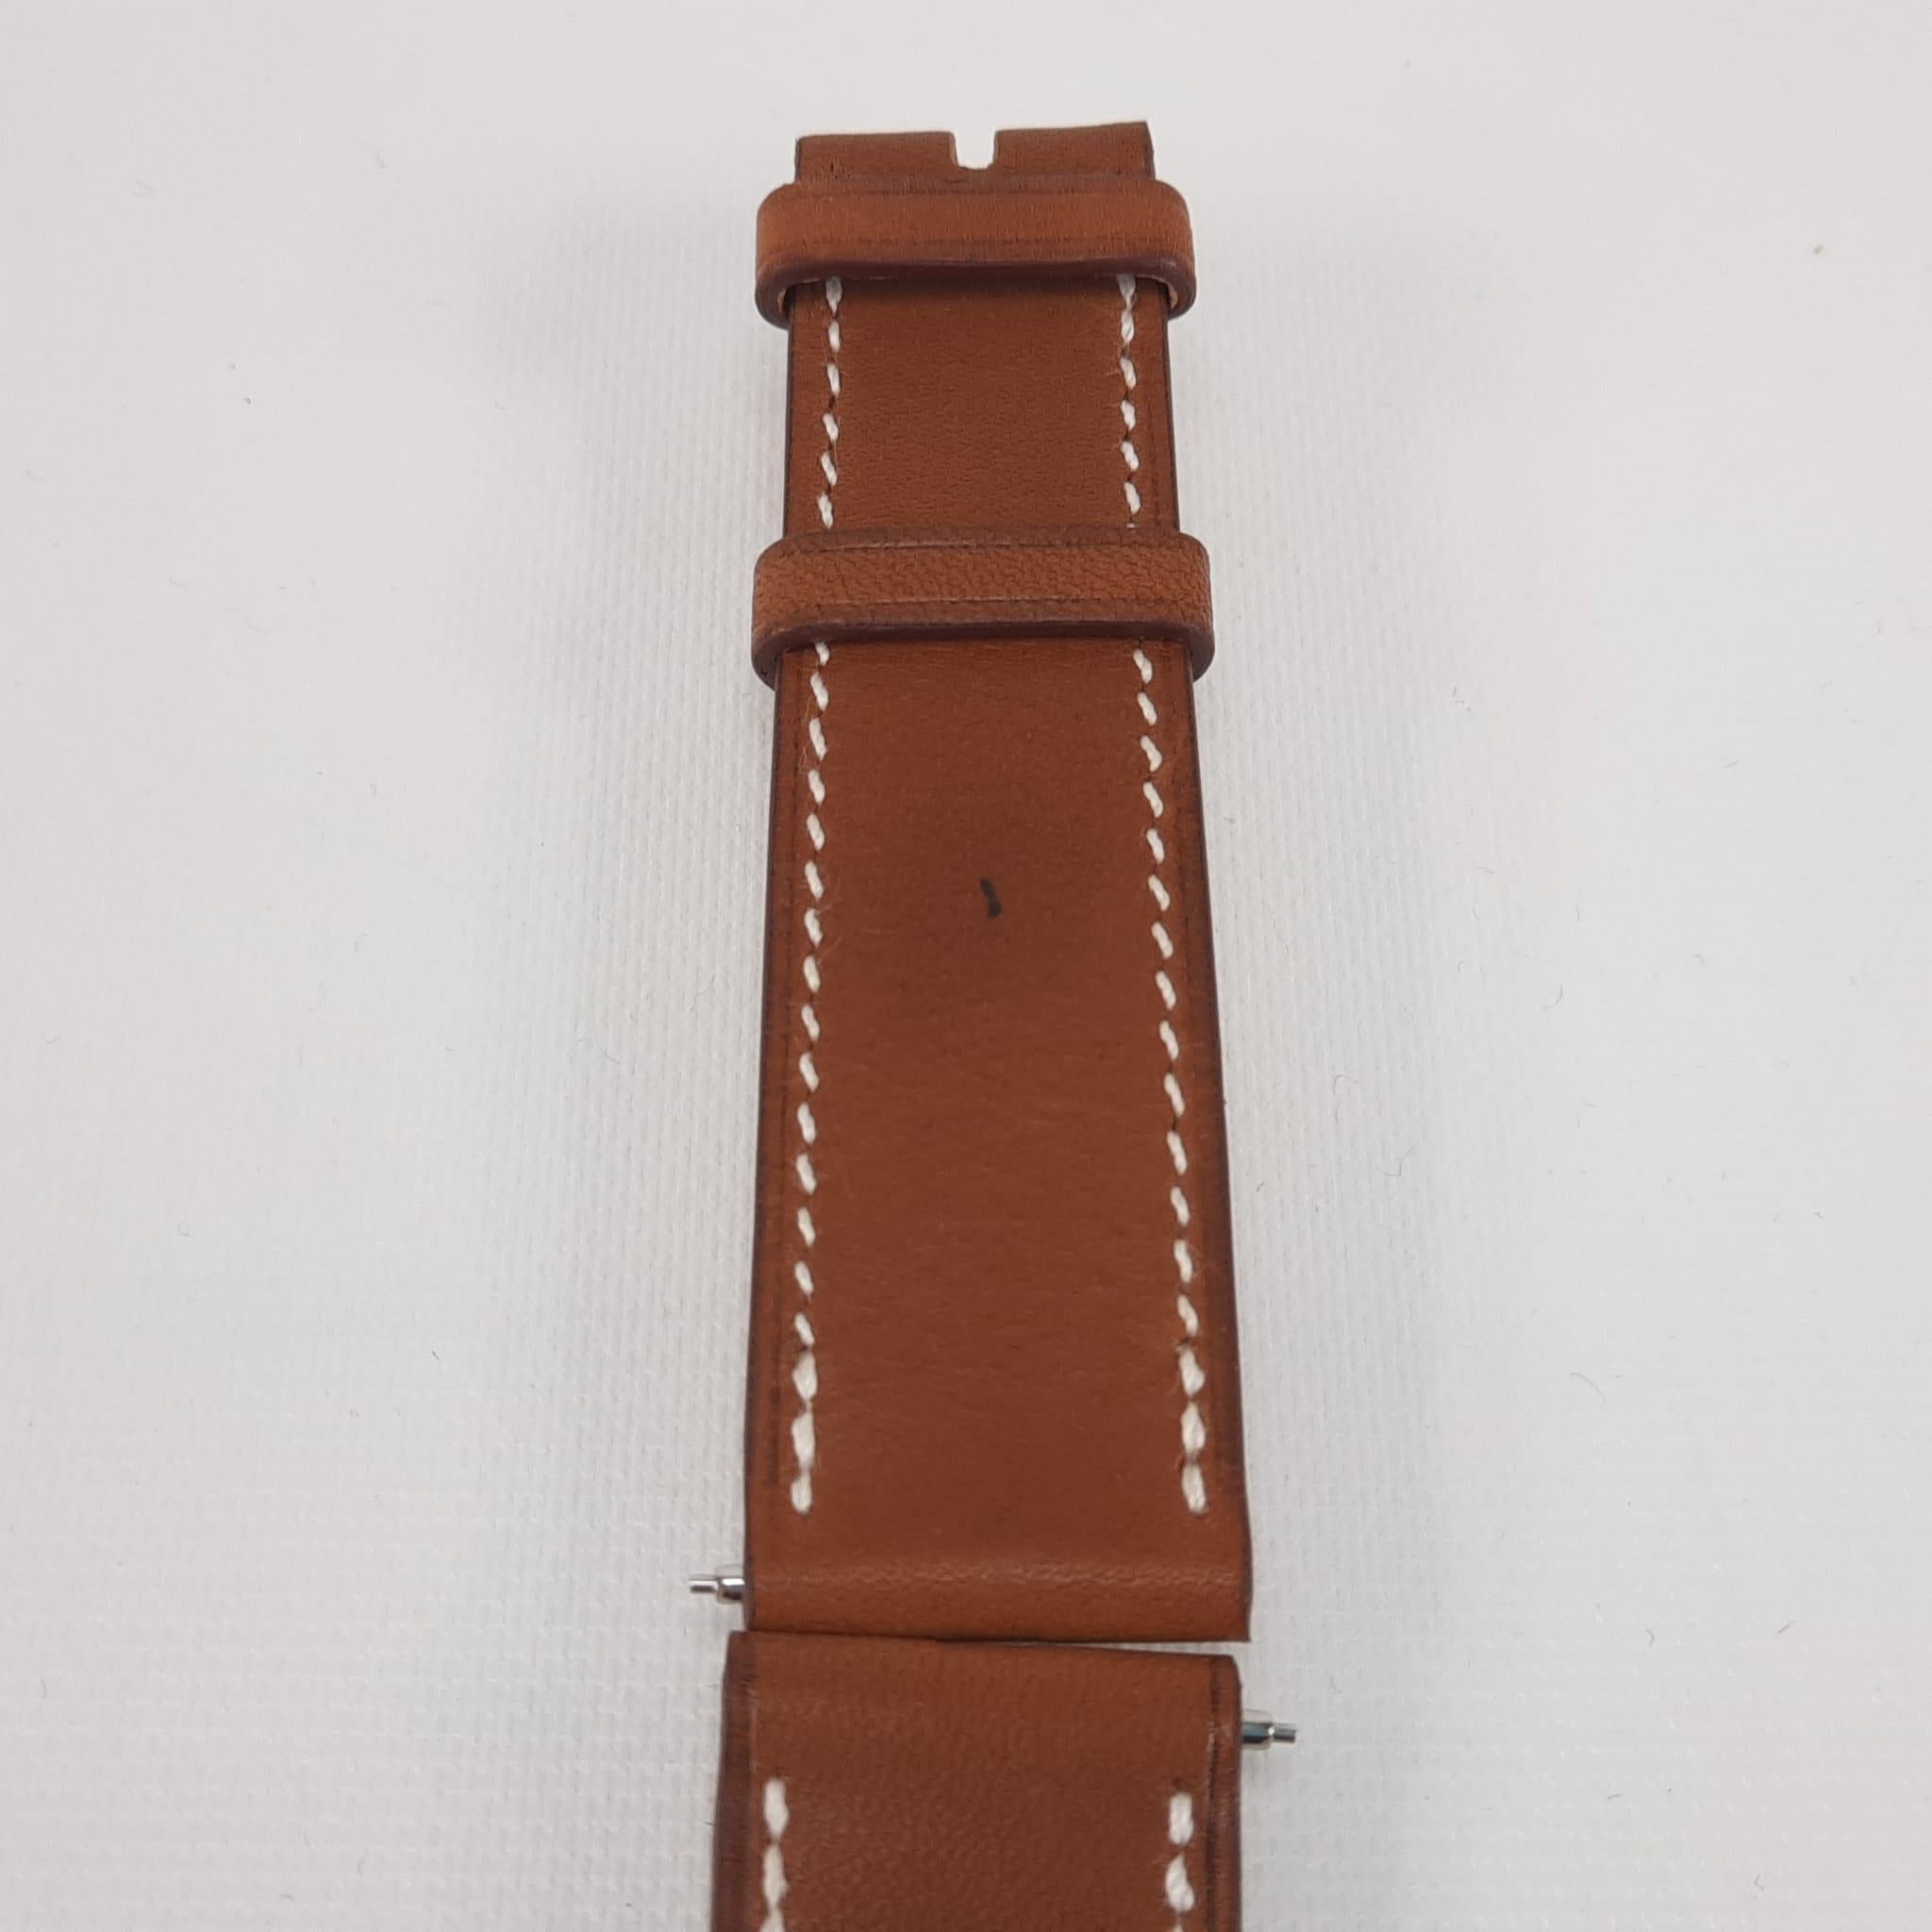 Cuir Veau Barenia Naturel  T-090 watch strap. Never used with box.